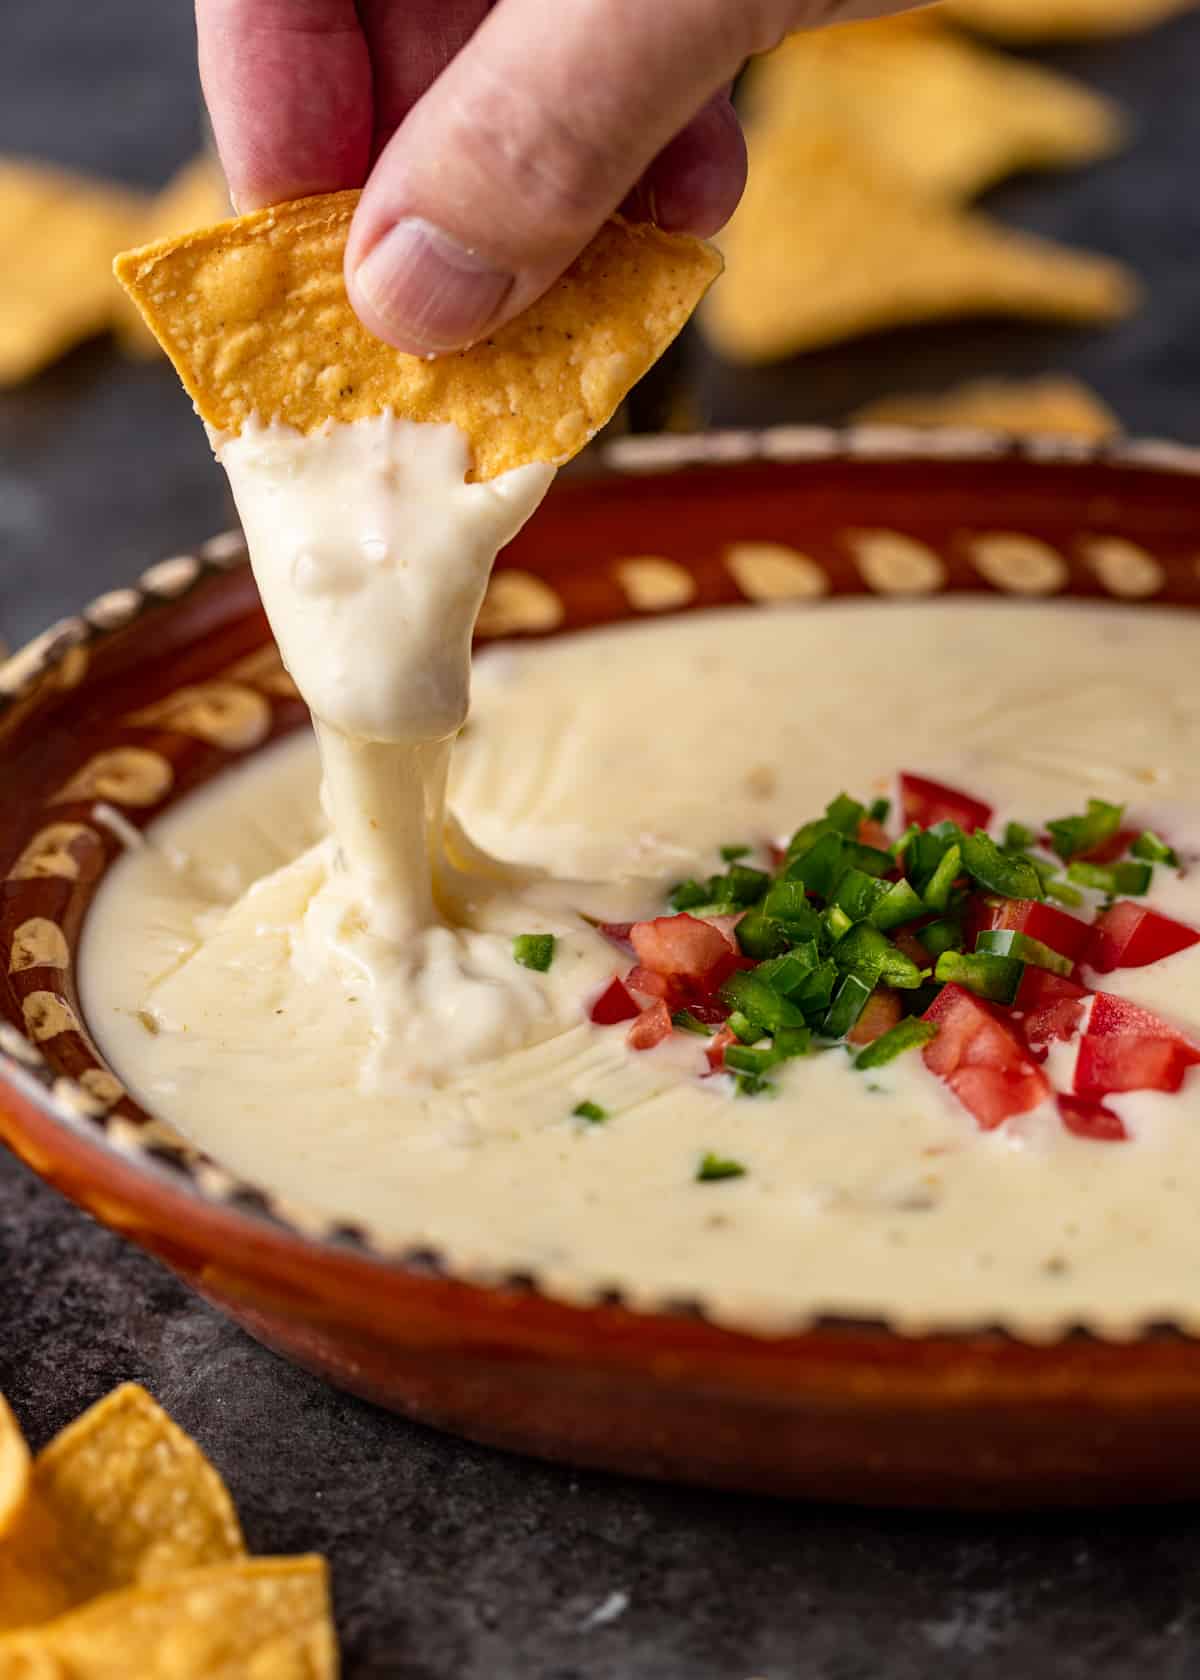 chipotle queso dripping from tortilla chiip into bowl of chile con queso